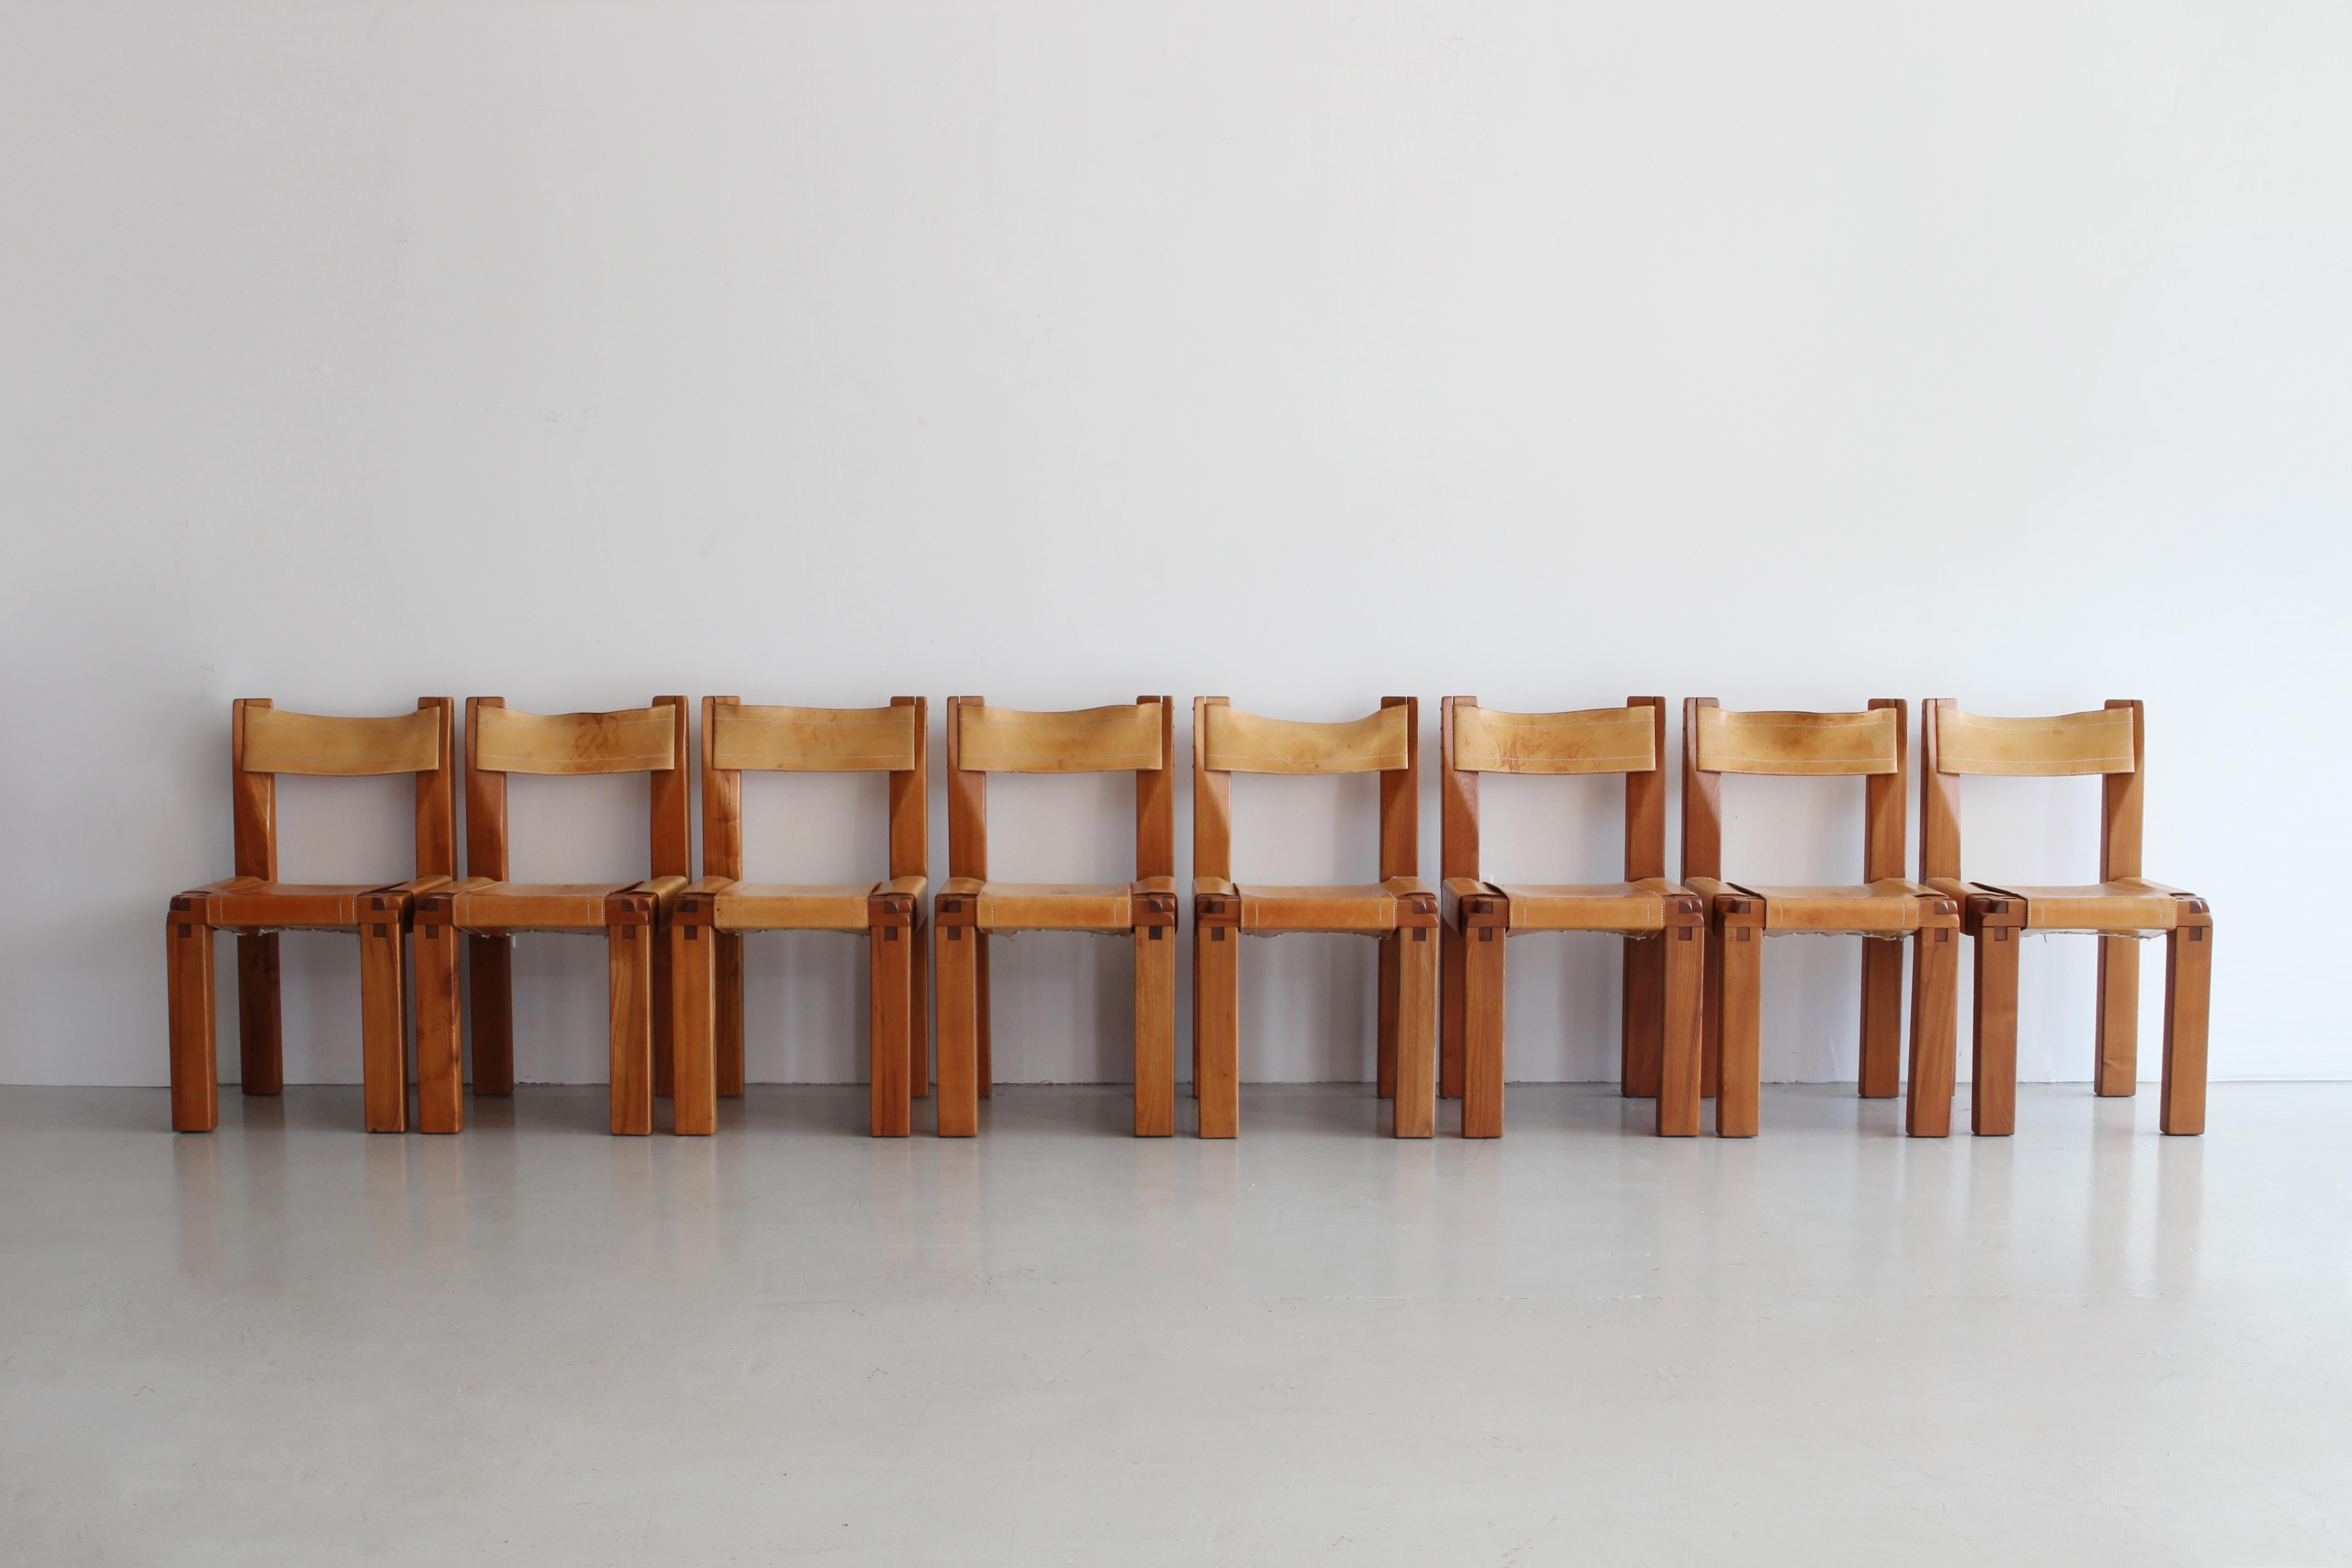 Set of eight dining chairs designed by French designer Pierre Chapo for Atelier Chapo, Paris. Cubic design of solid elmwood with saddle leather seat. Beautiful wood joint detail and fantastic patina to leather with contrast stitching. Priced as a